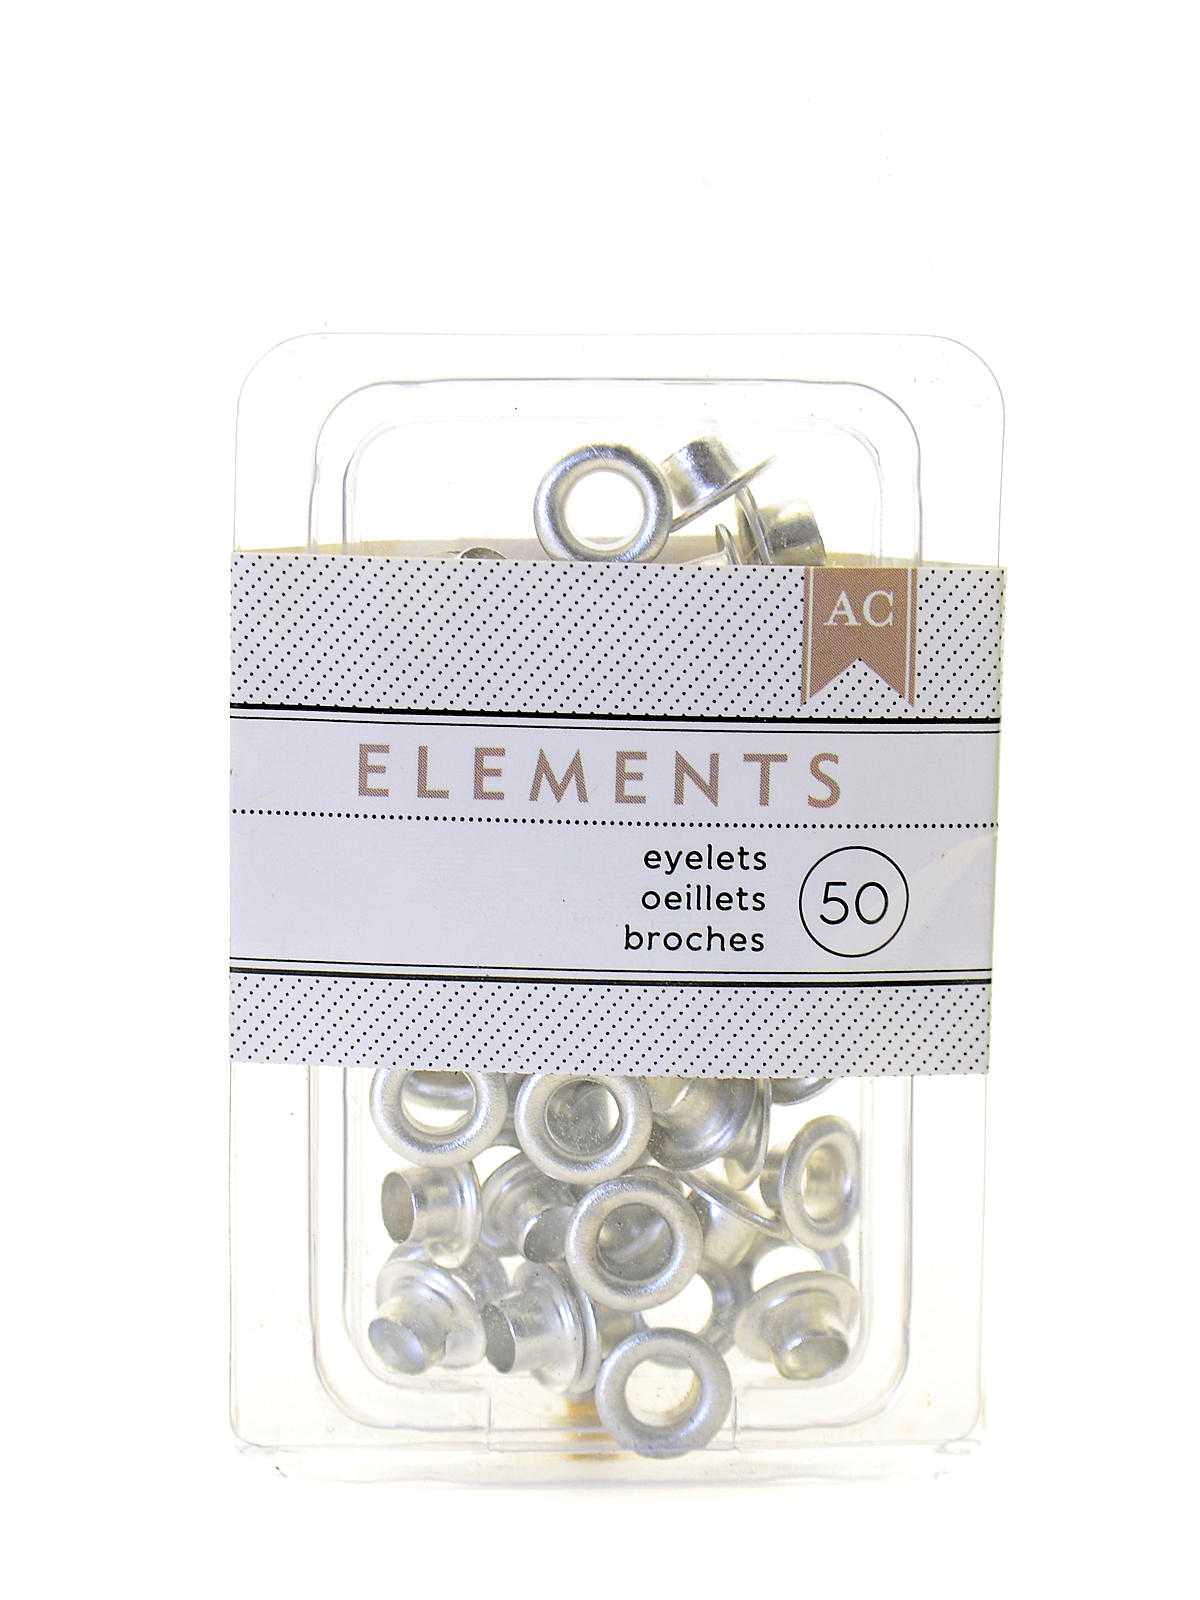 Metallic Eyelets Silver 3 16 In. Pack Of 50